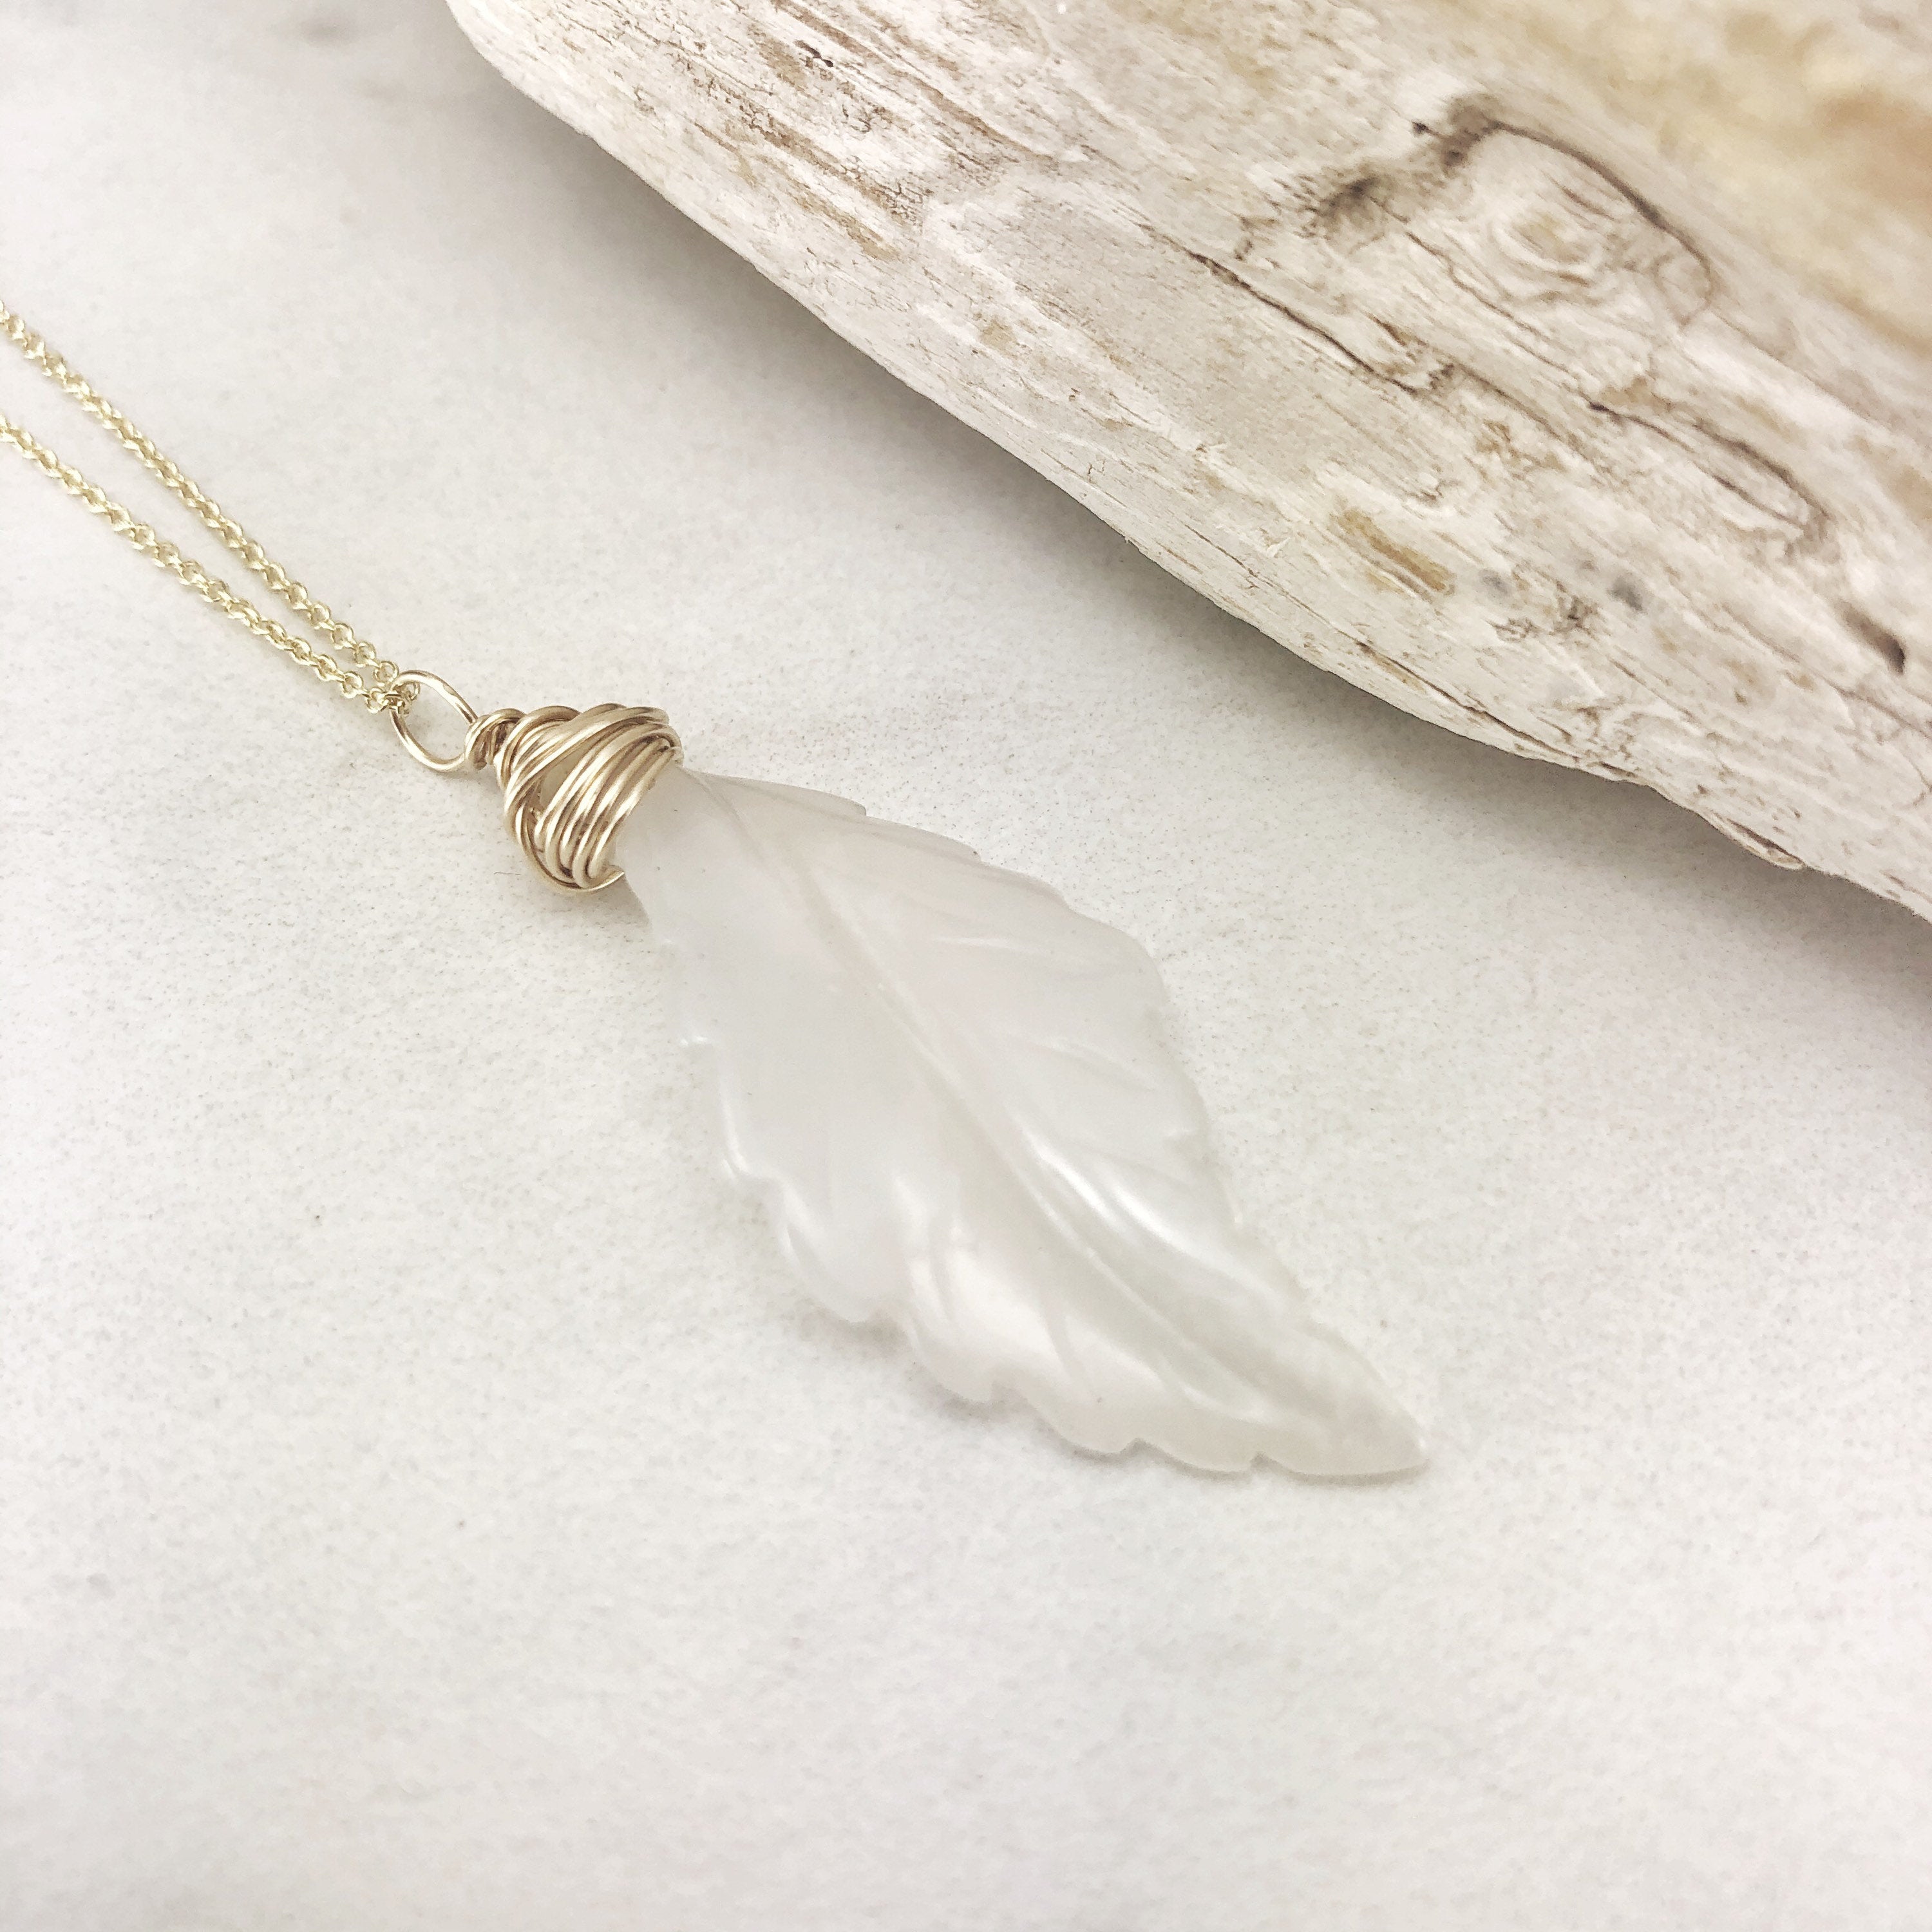 Carved Agate Feather and Gold Necklace